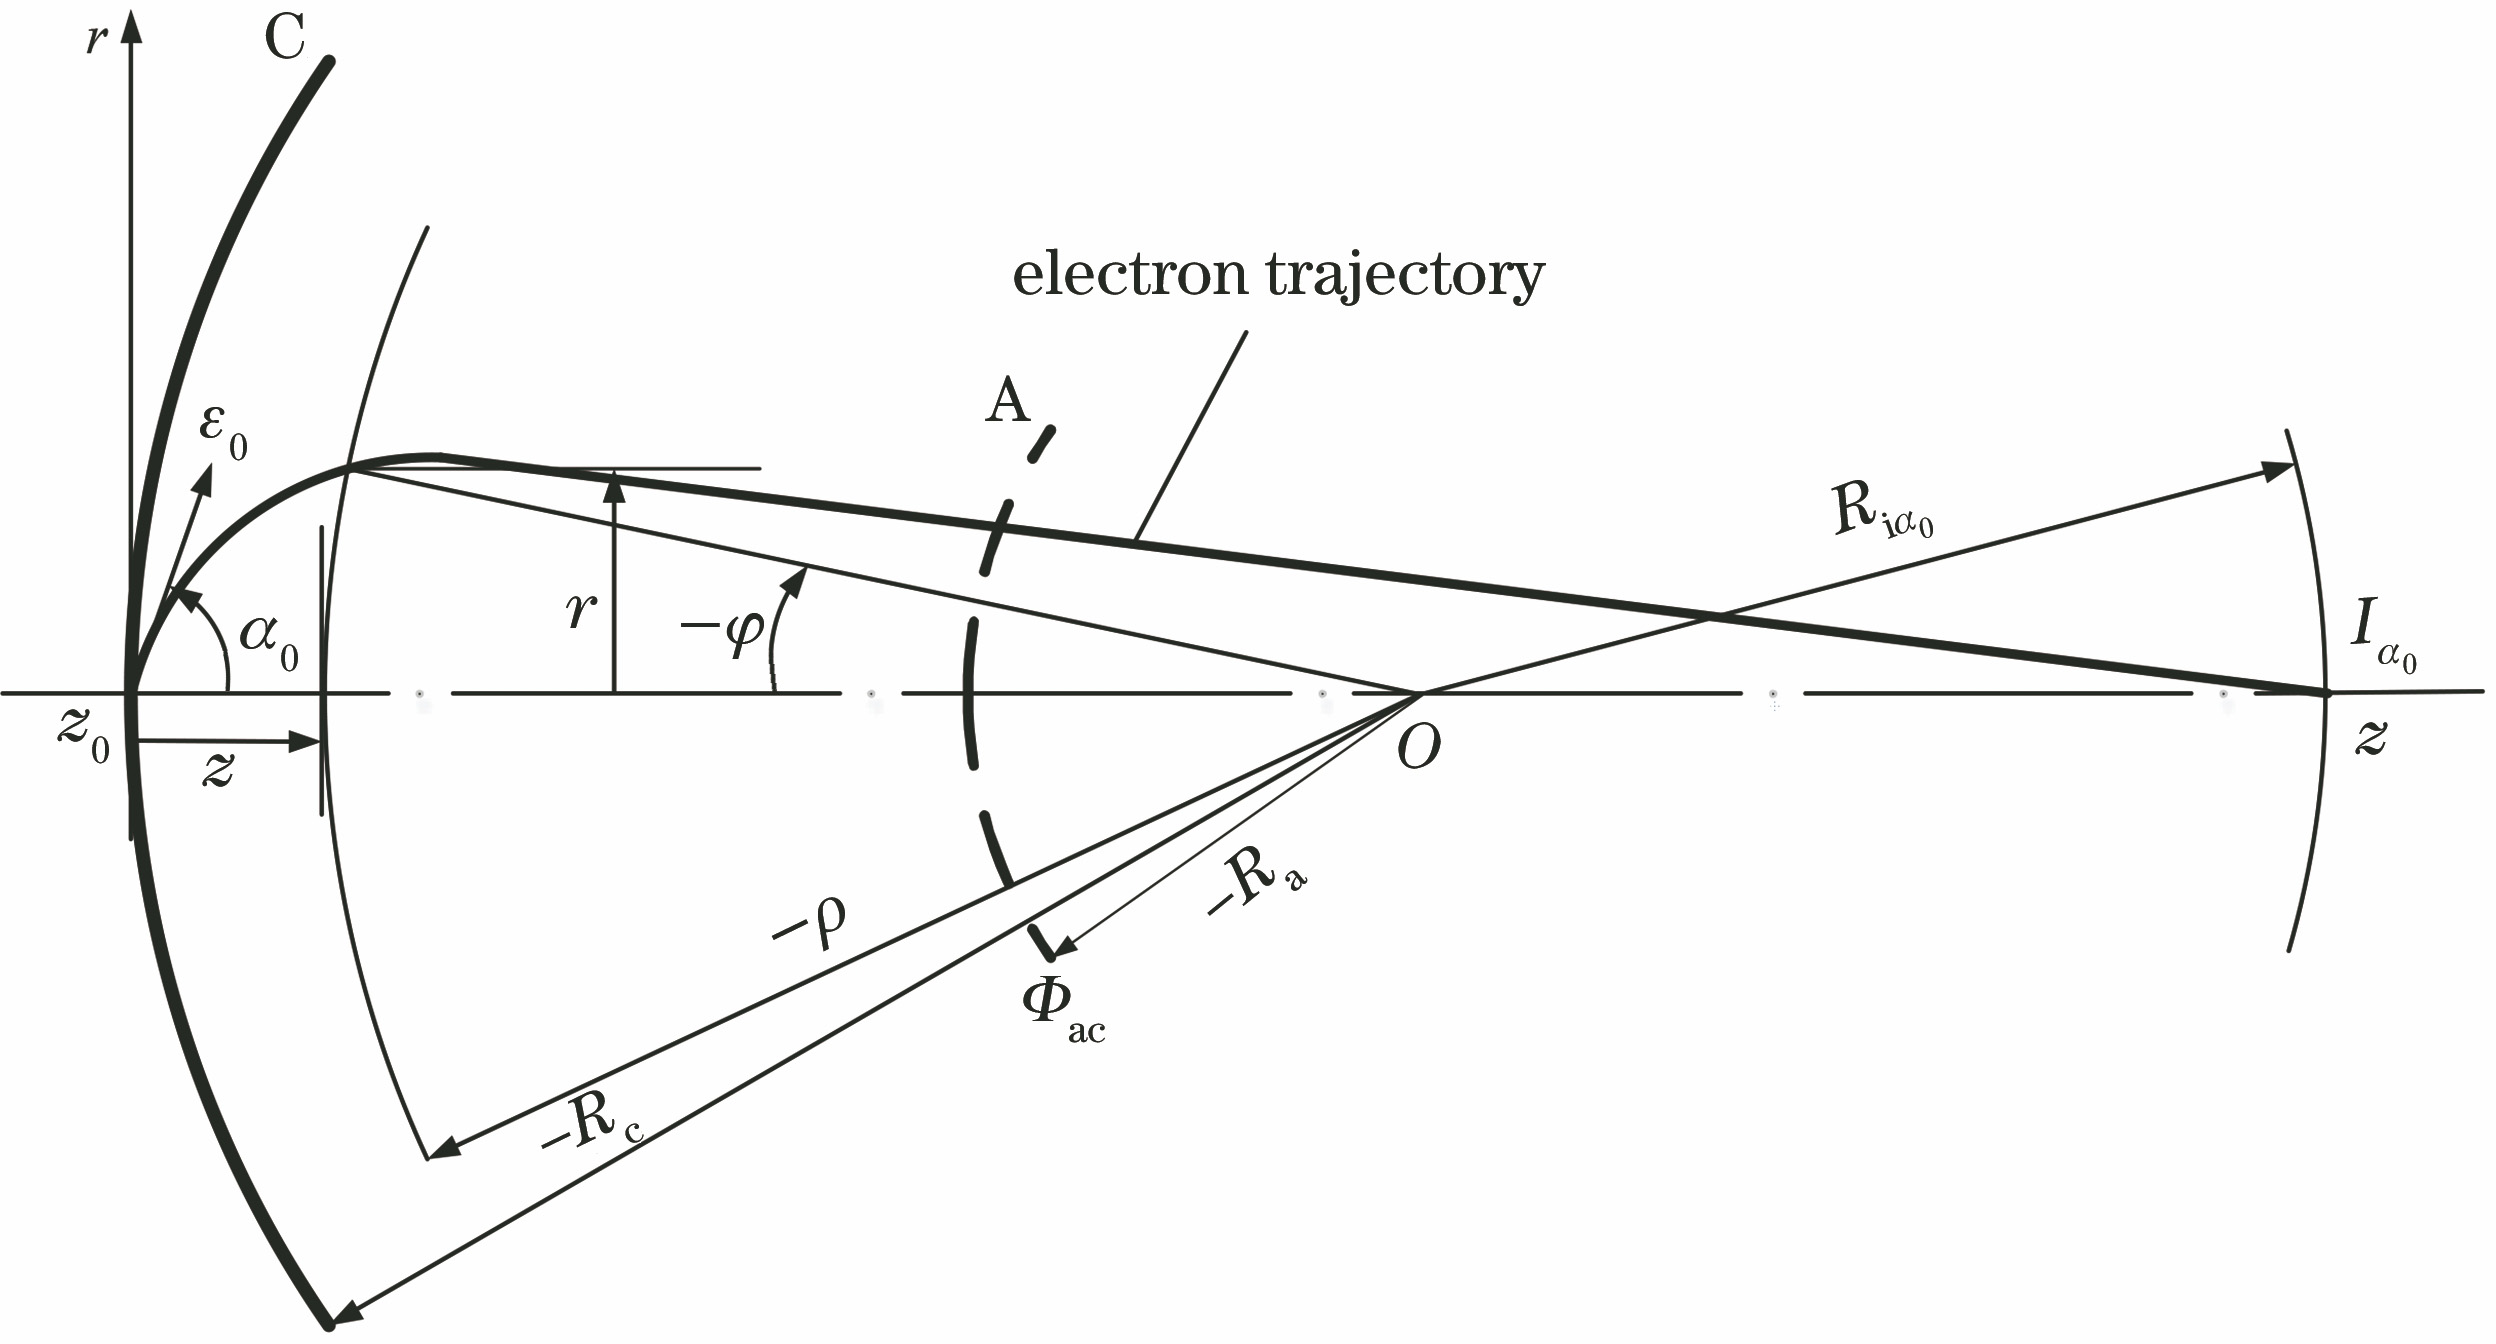 Practical electron trajectory r=r(z) under cylindrical coordinate system in electrostatic focusing concentric spherical system composed of two electrodes